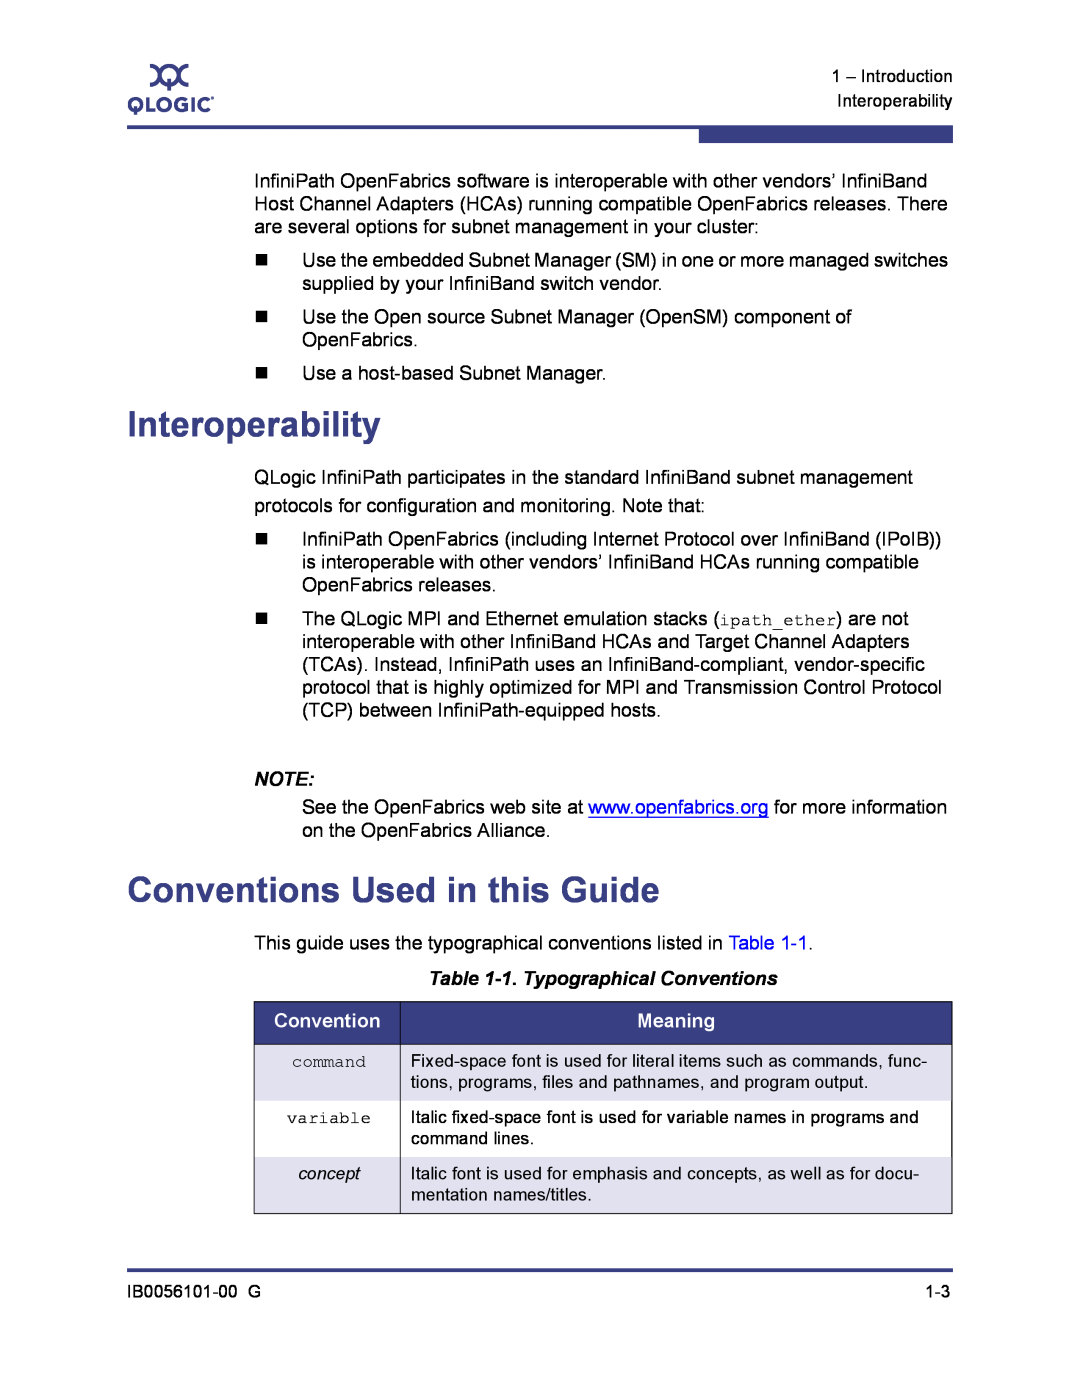 Q-Logic IB0056101-00 G manual Interoperability, Conventions Used in this Guide, 1. Typographical Conventions, Meaning 